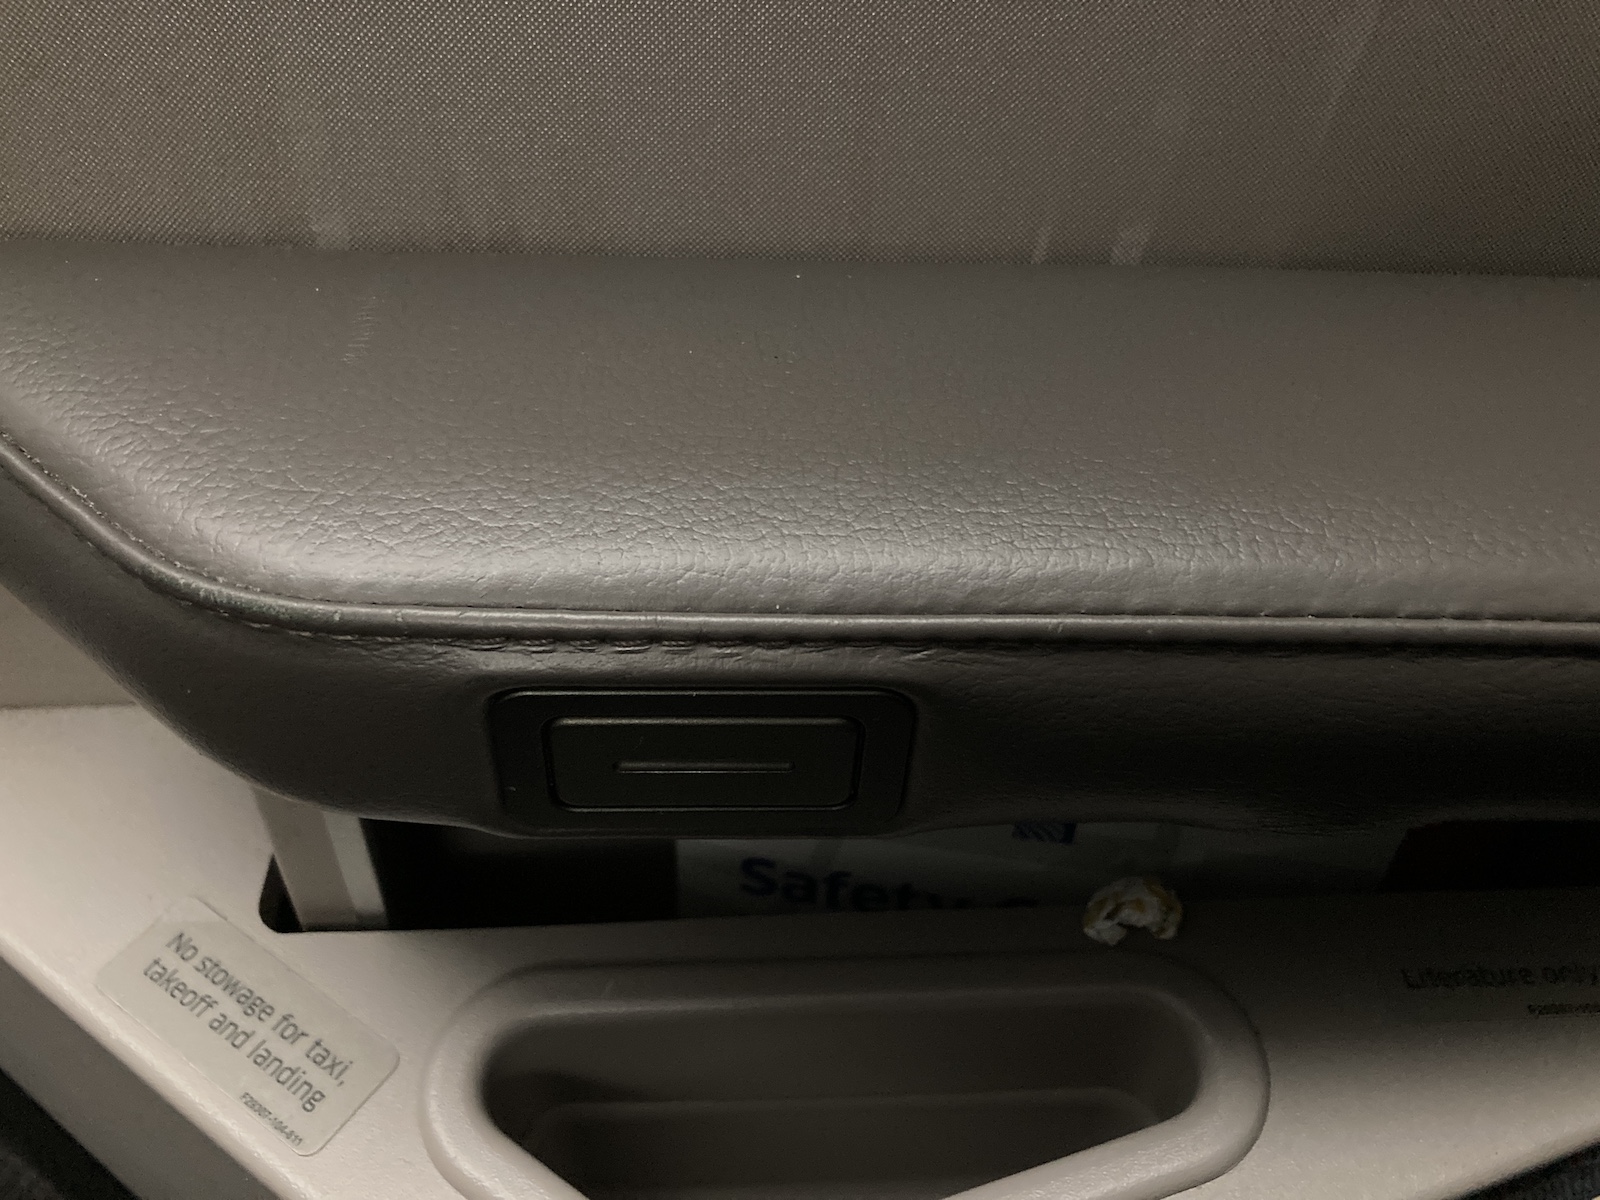 United Polaris Business Class Review: 787-10 Dreamliner FRA to EWR - questionable cleaning